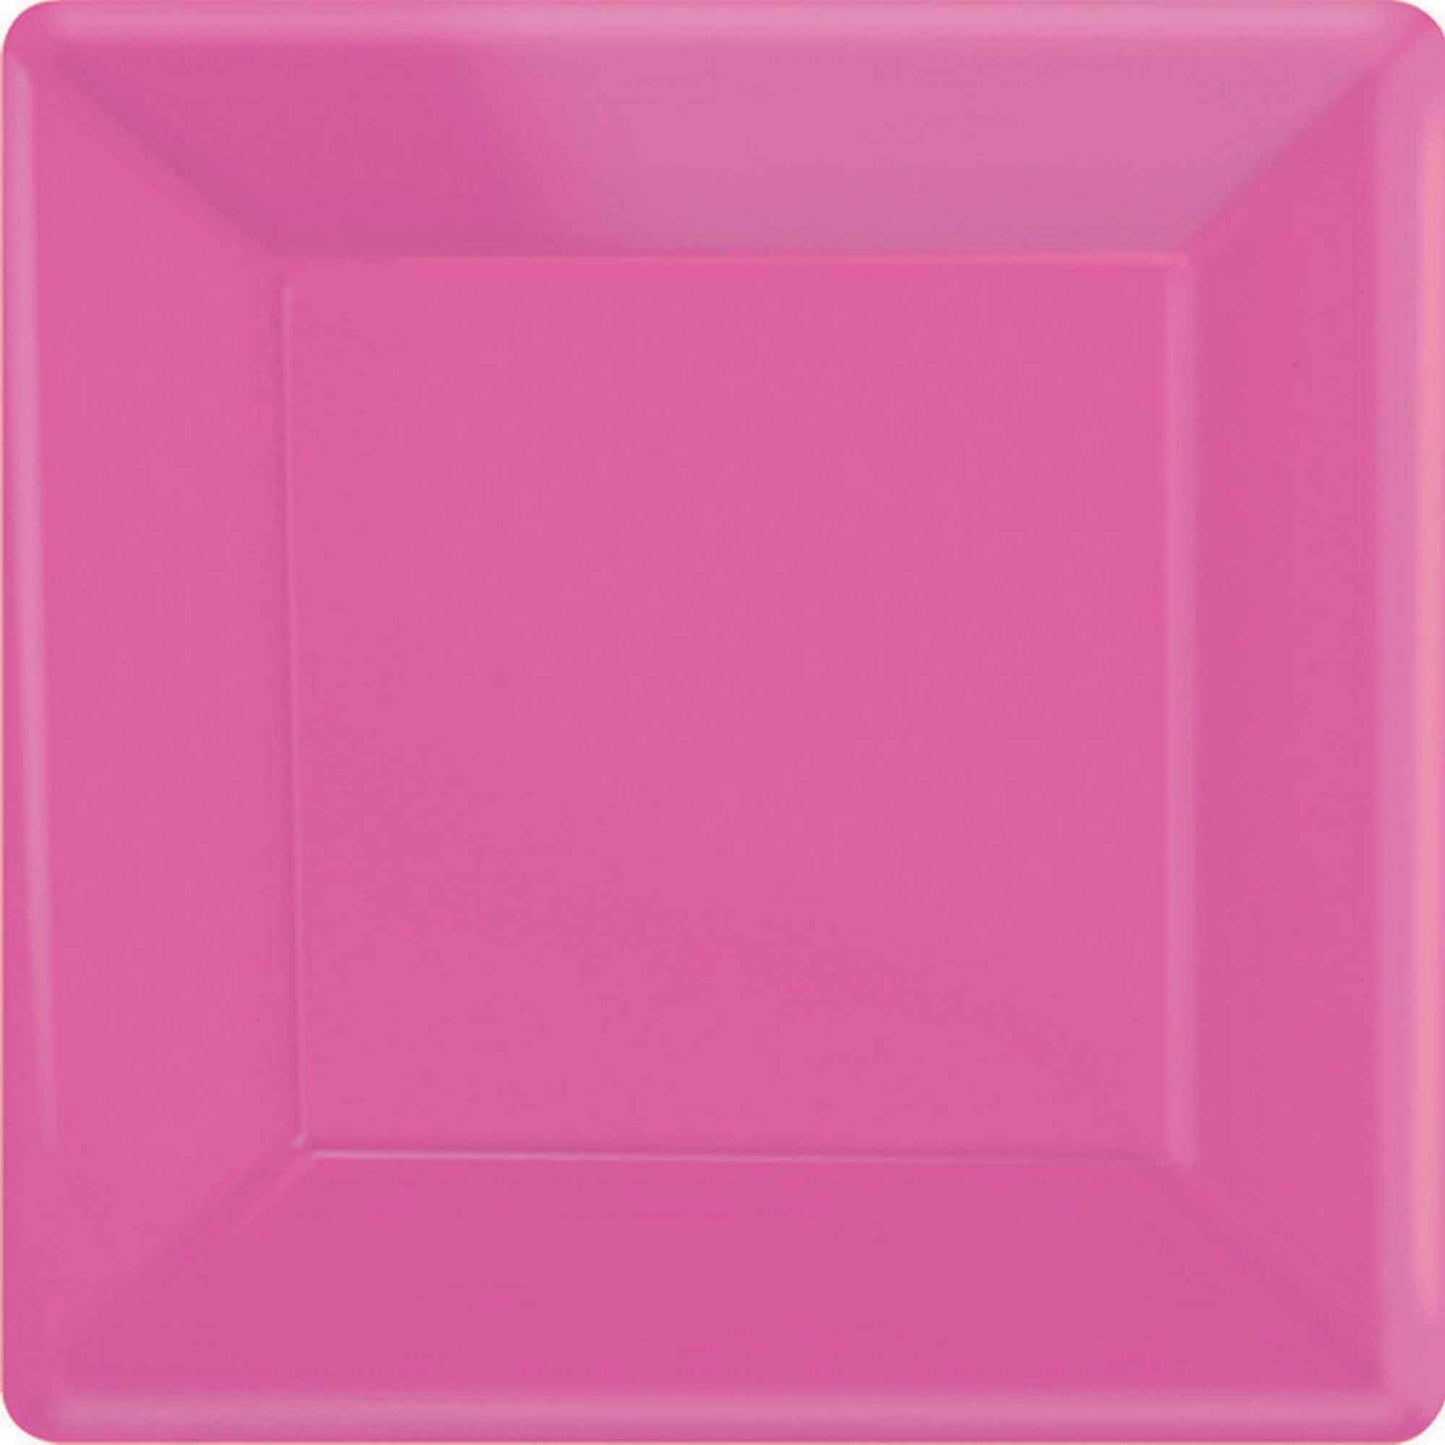 Paper Plates 26cm Square 20CT - Bright Pink